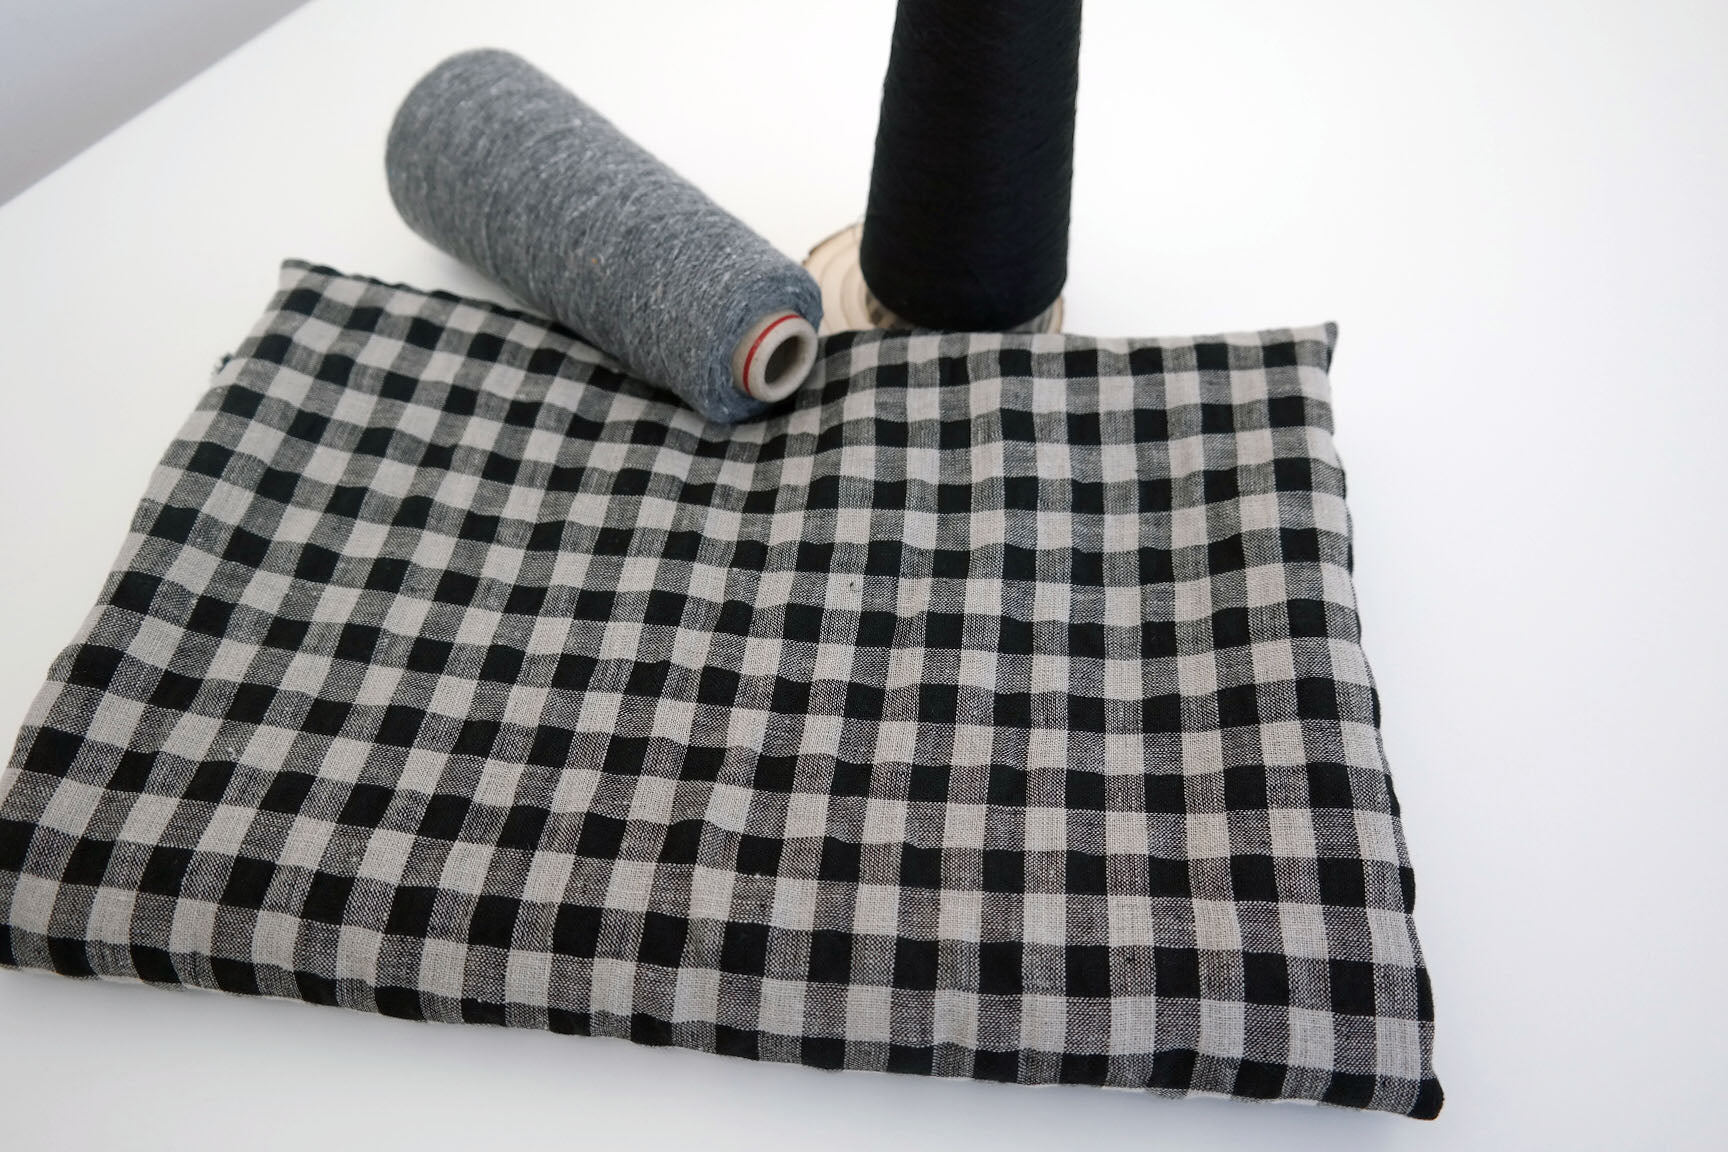 Linen Gingham Check Seersucker Stretch Fabric (6515) - The Linen Lab - Black and Natural